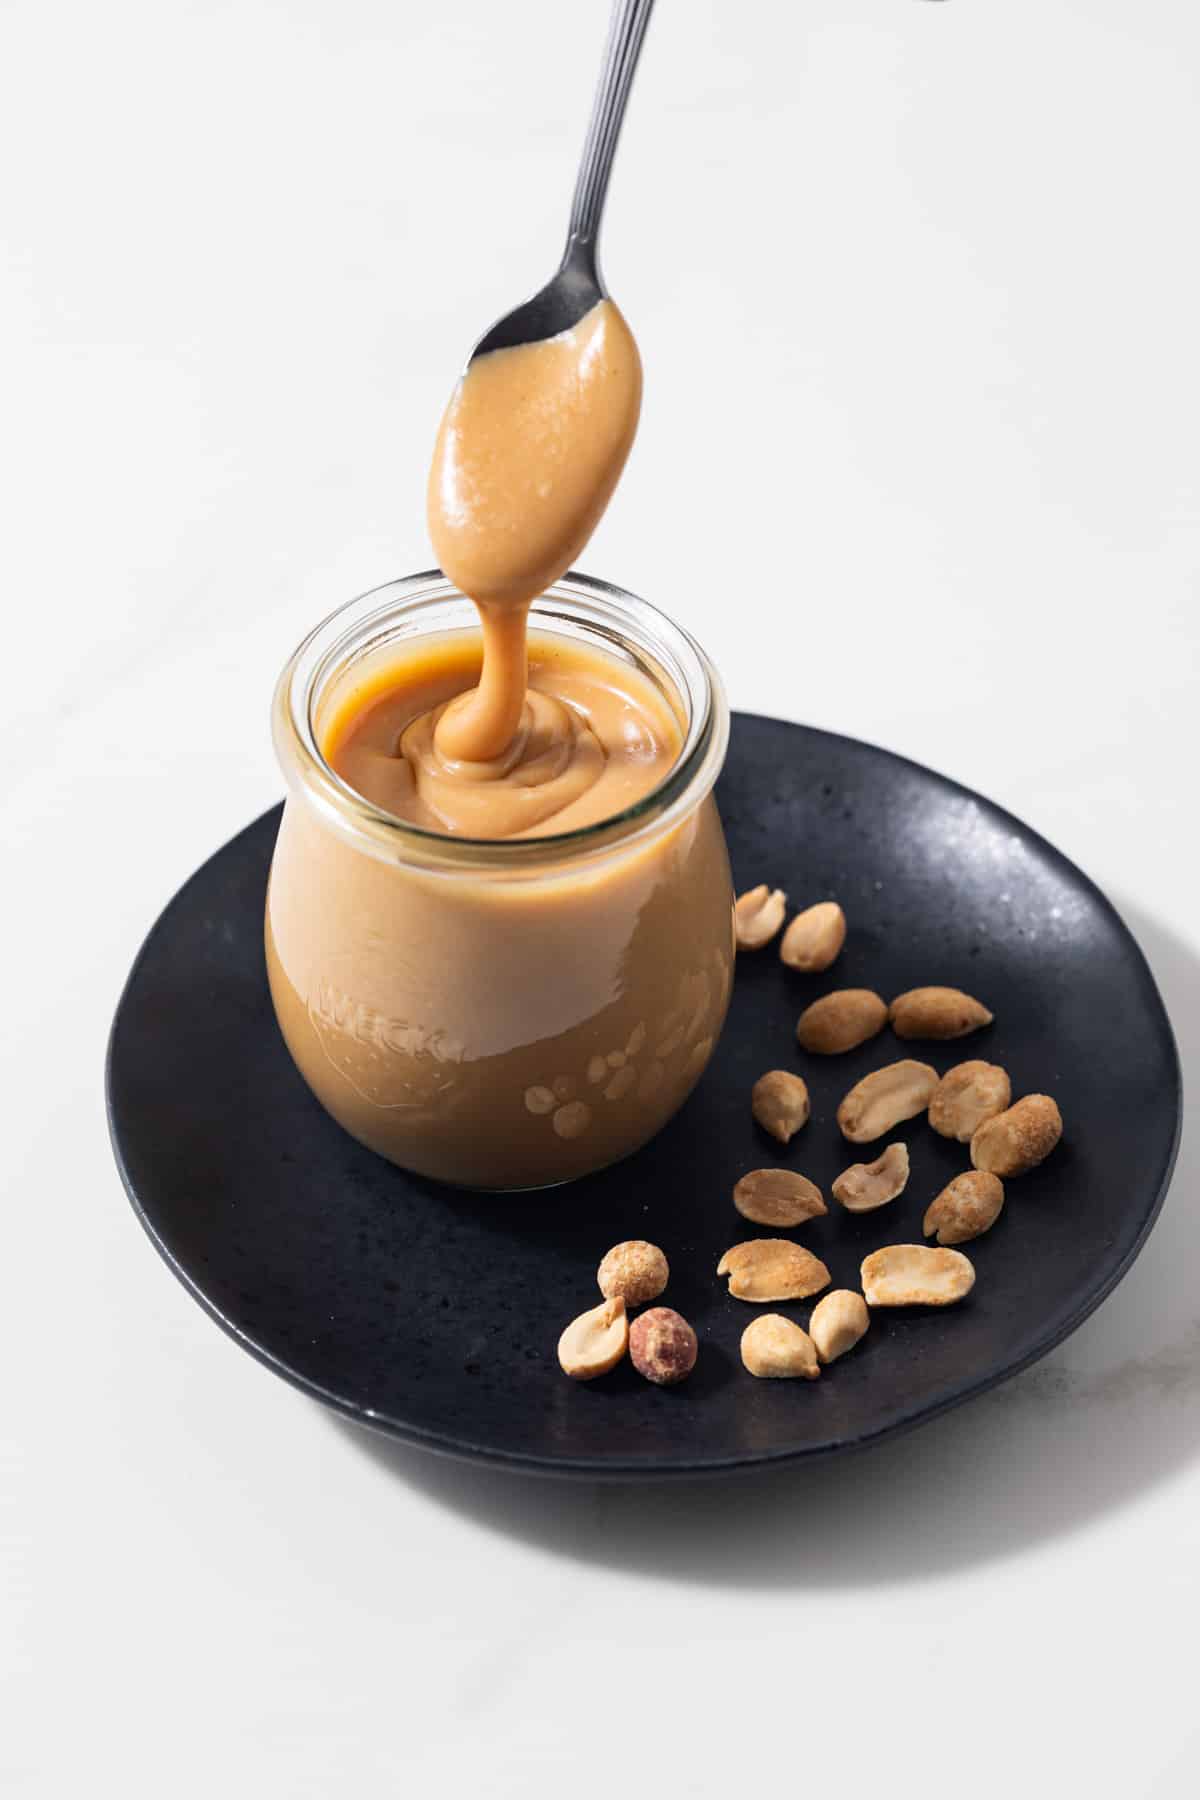 Creamy peanut butter sauce spooned out of a glass jar.